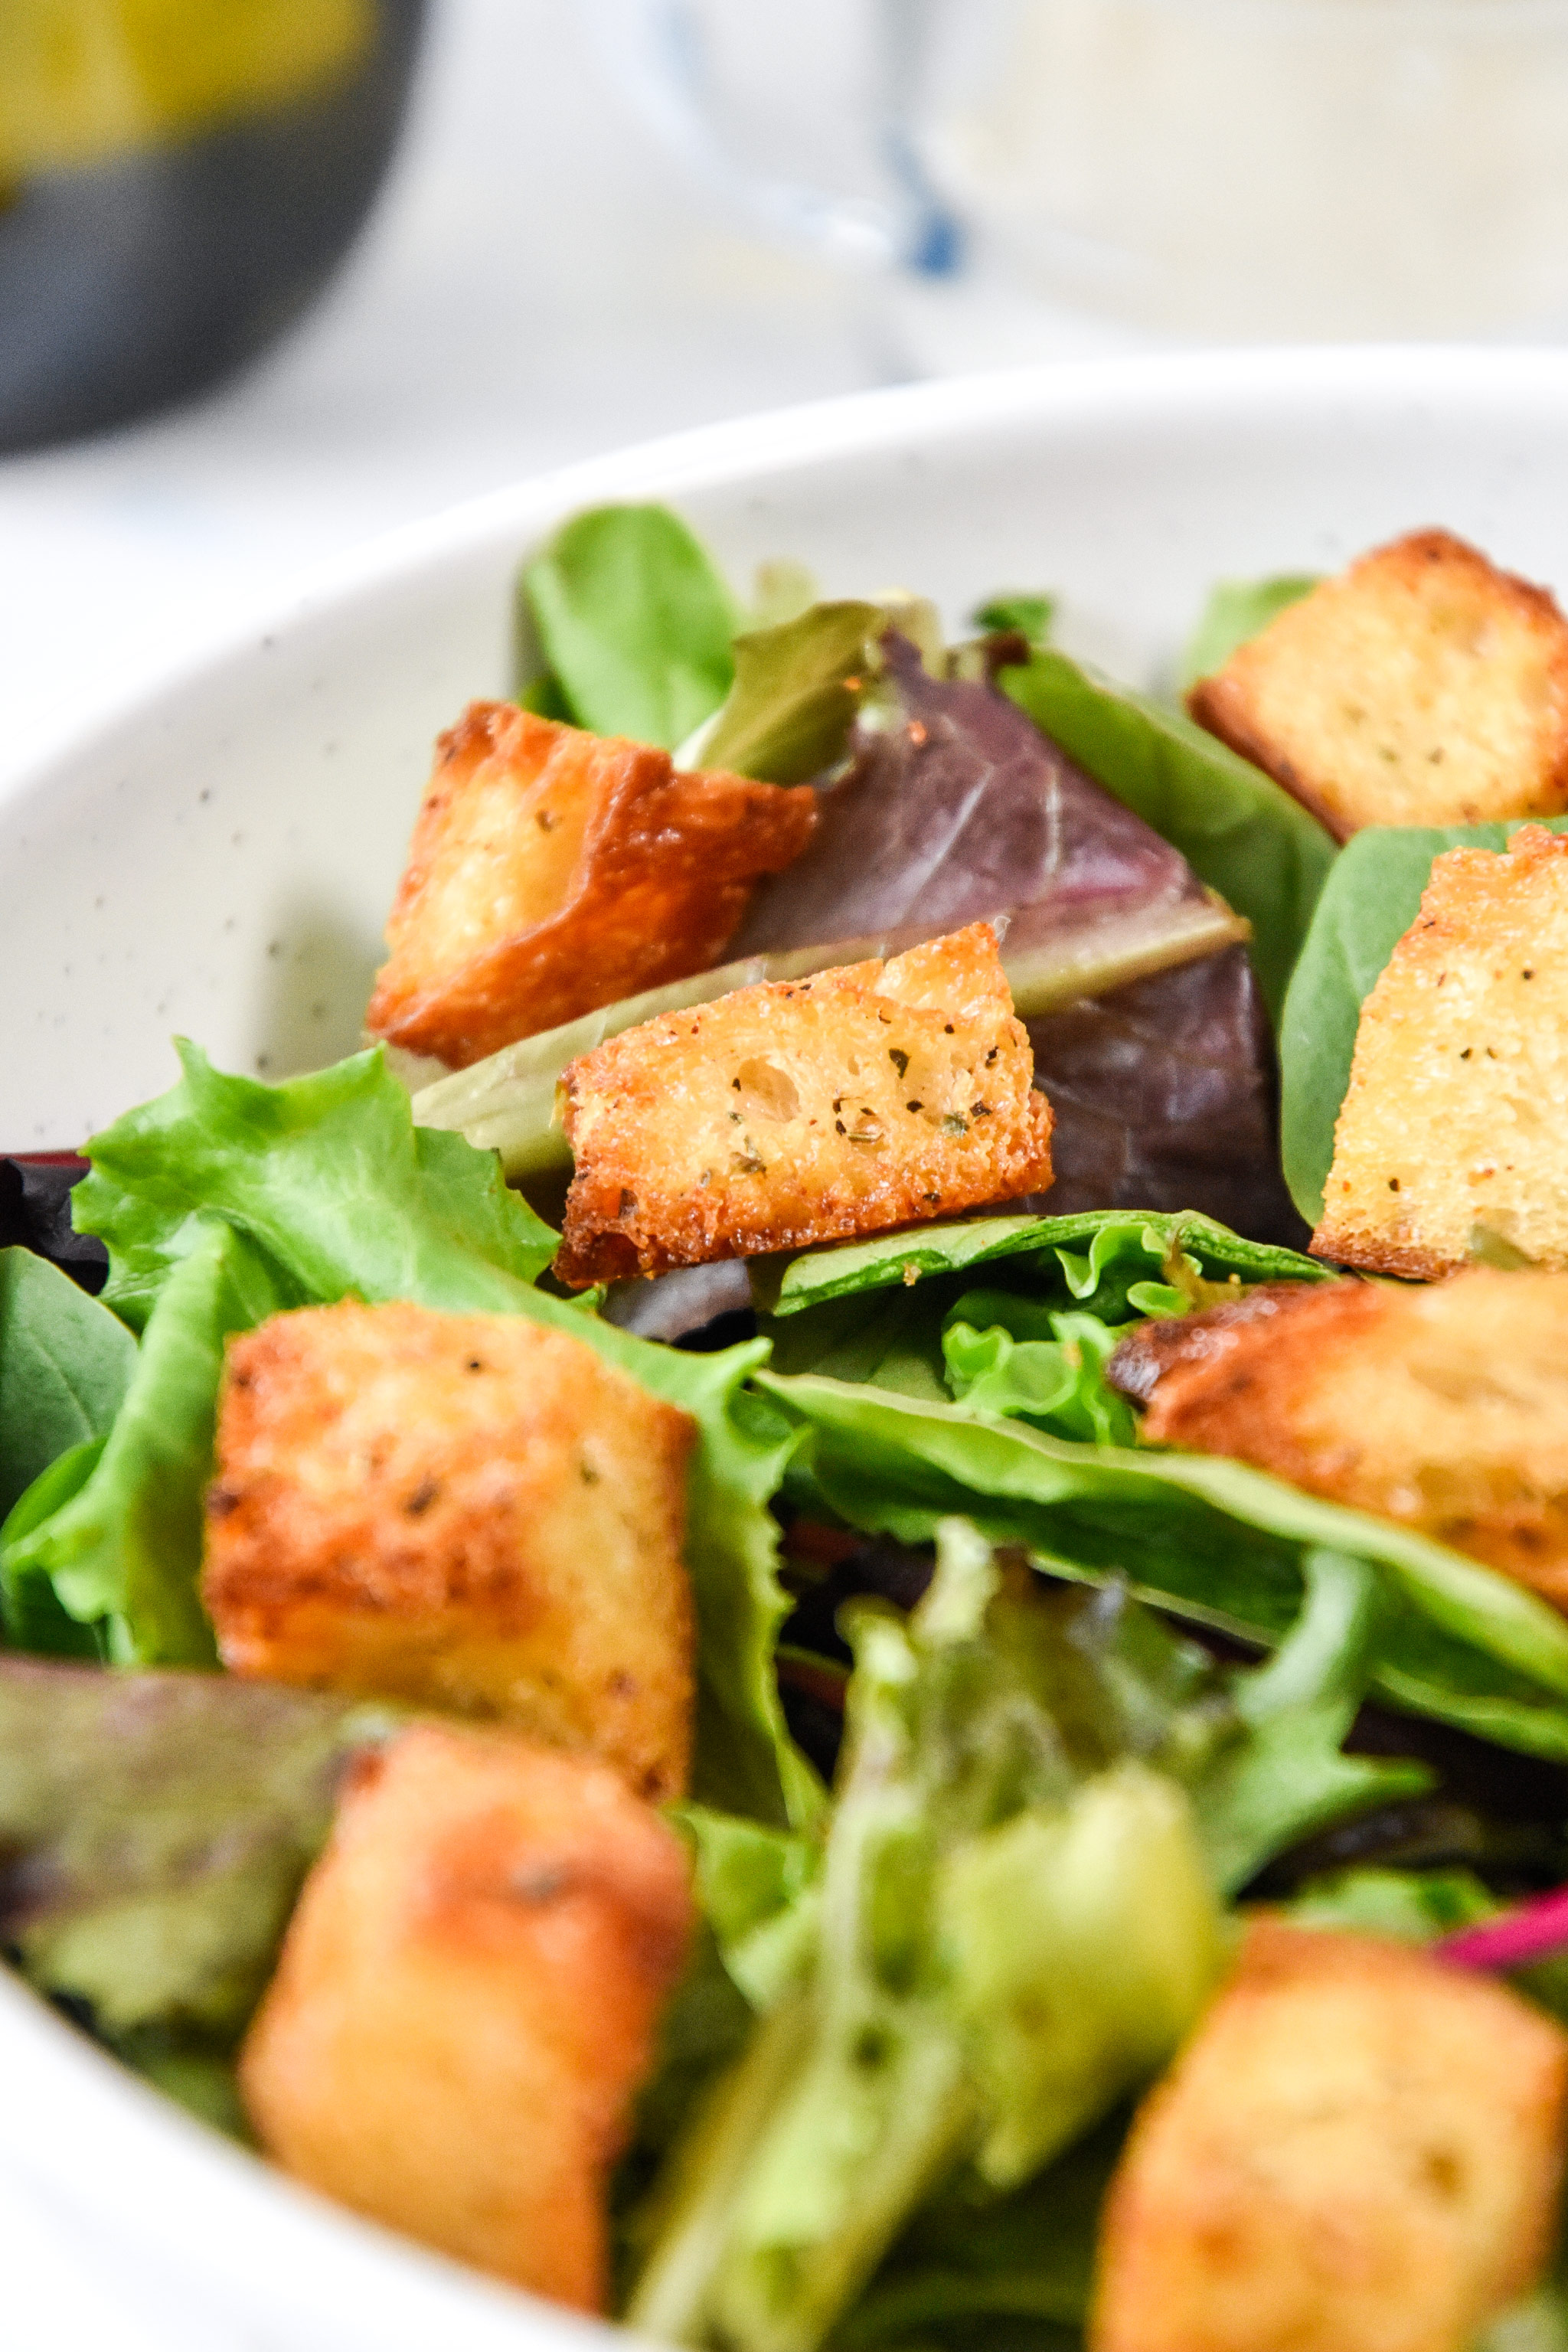 homemade croutons on a green salad in a bowl.